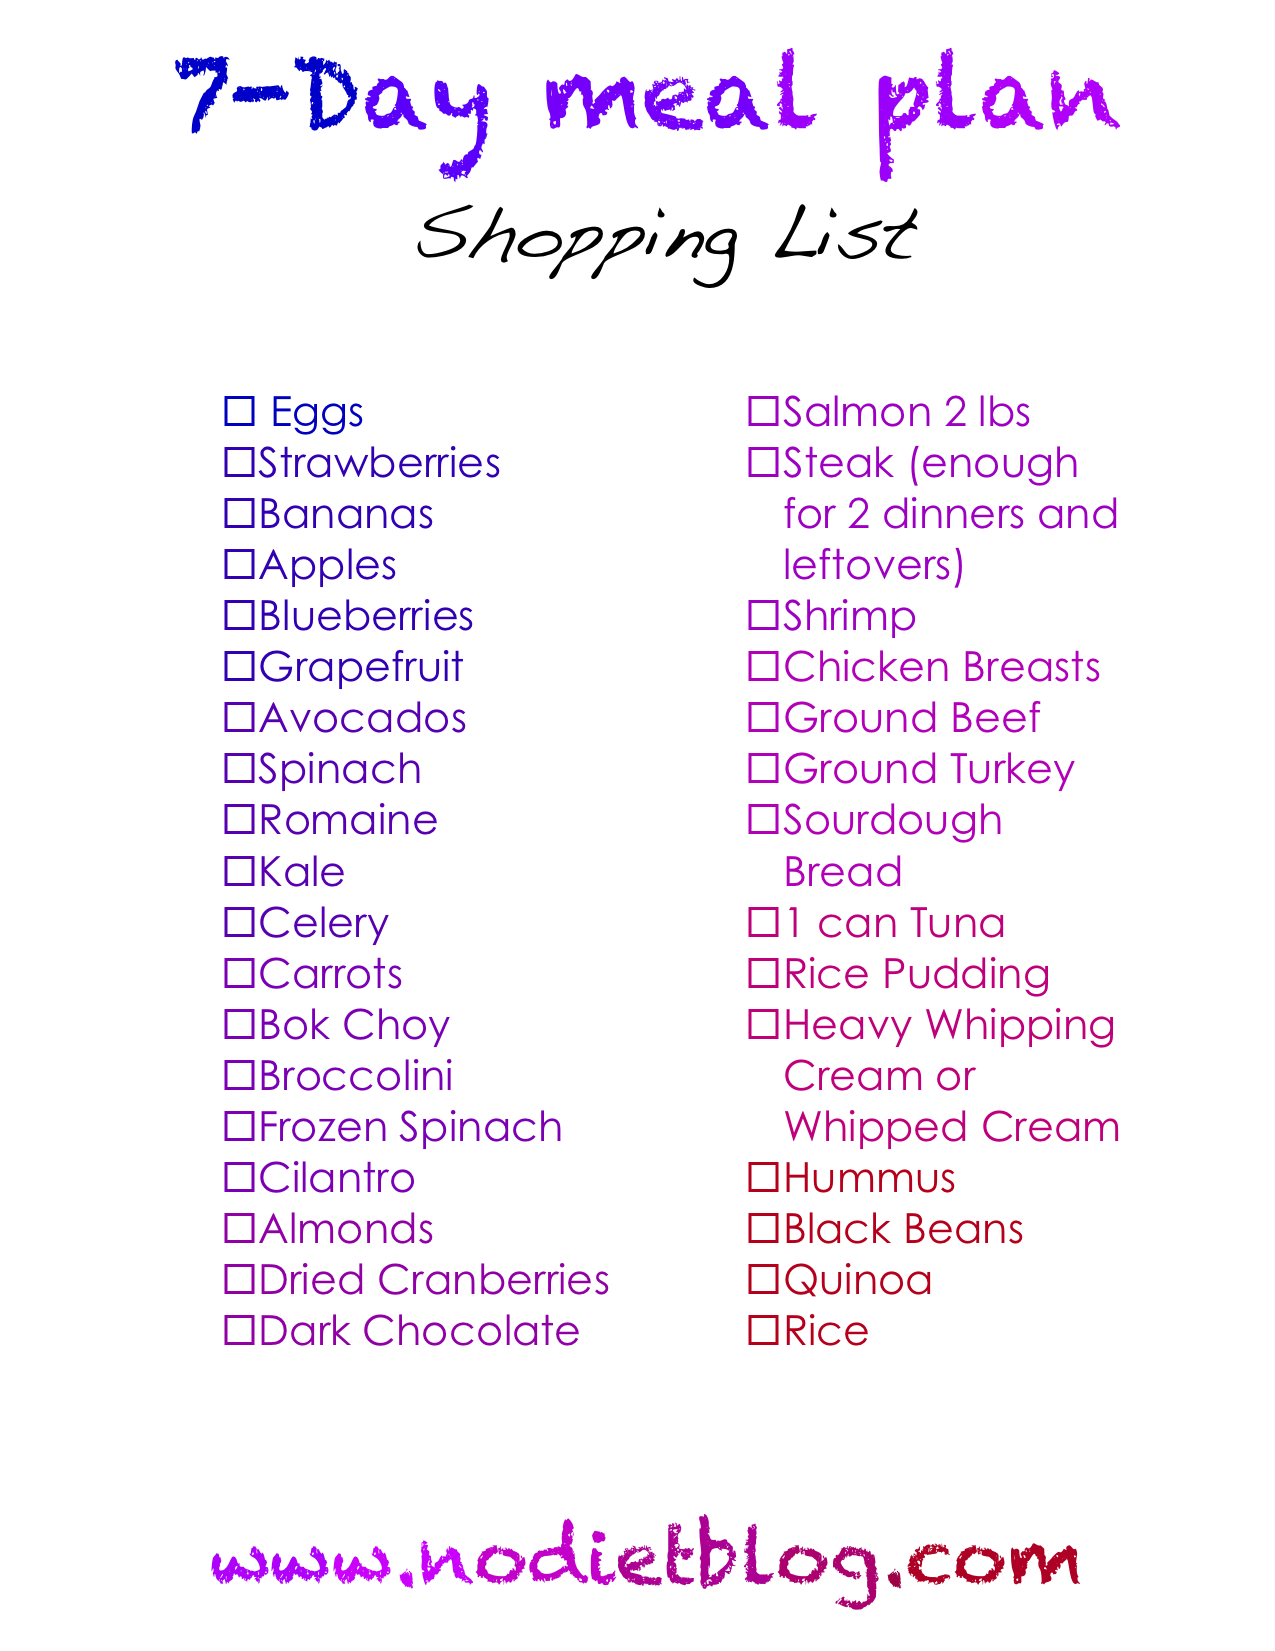 7 day meal plan to lose weight with shopping list